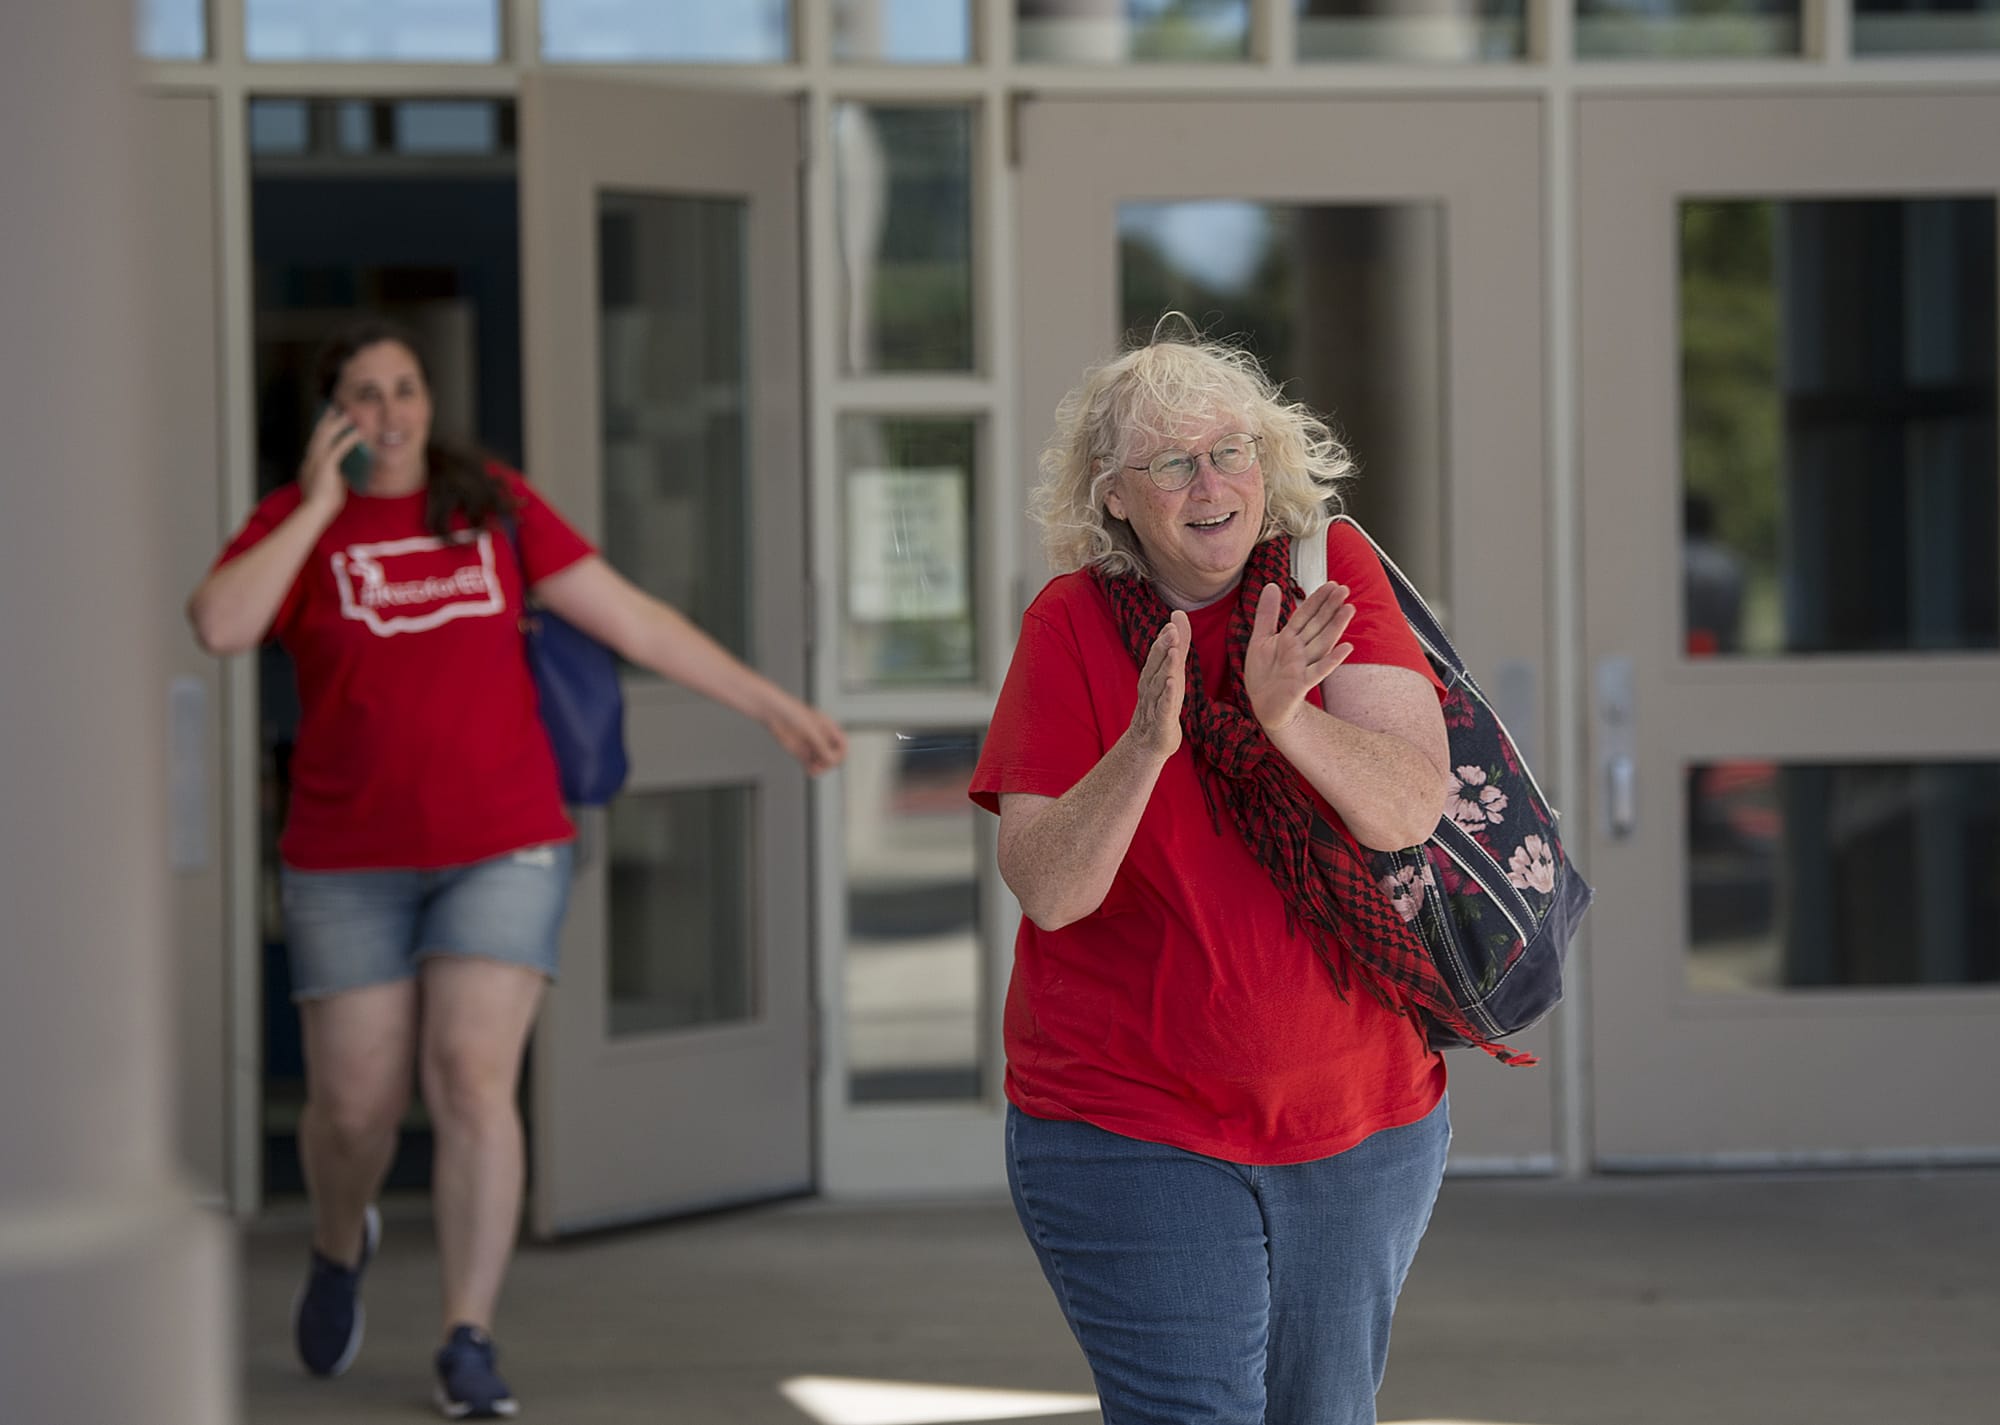 School nurse Marcia Schneider, right, shows her enthusiasm for the new contract after voting with fellow members of the Vancouver Education Association at Skyview High School on Tuesday afternoon, Sept. 4, 2018.